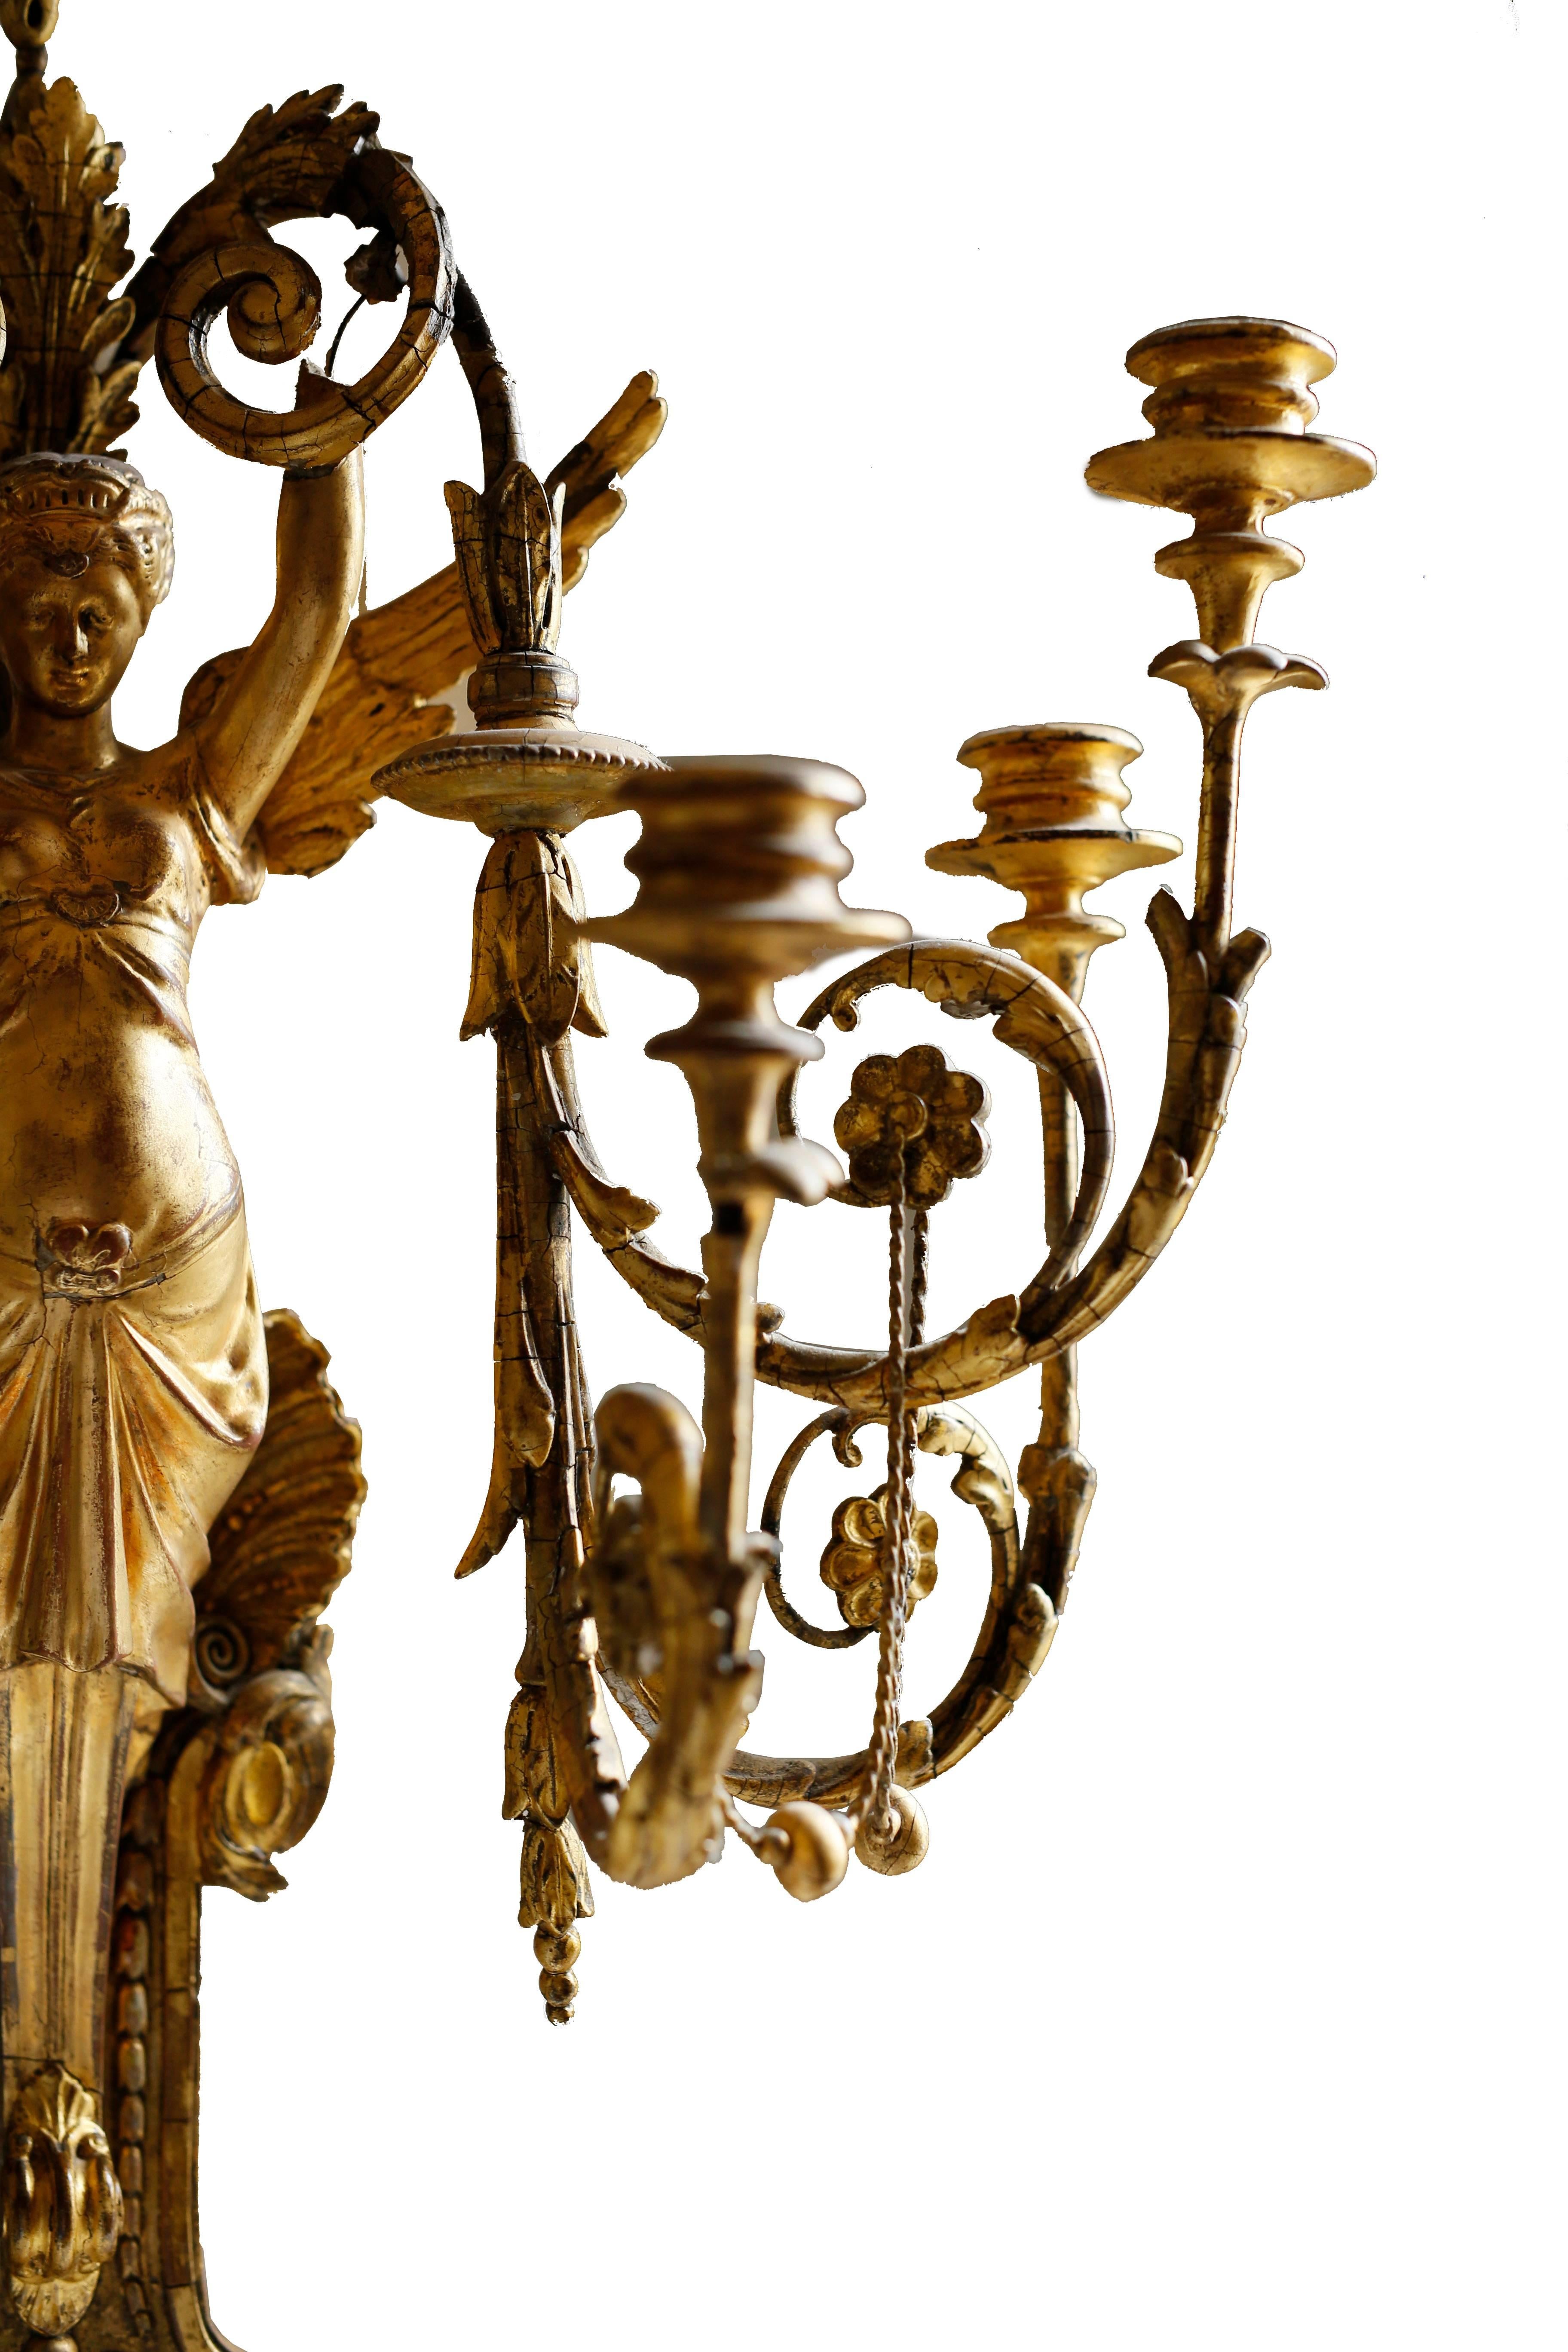 Pair of Early 19th Century Italian Neoclassical Gilt Figural 6-Light Sconces For Sale 2